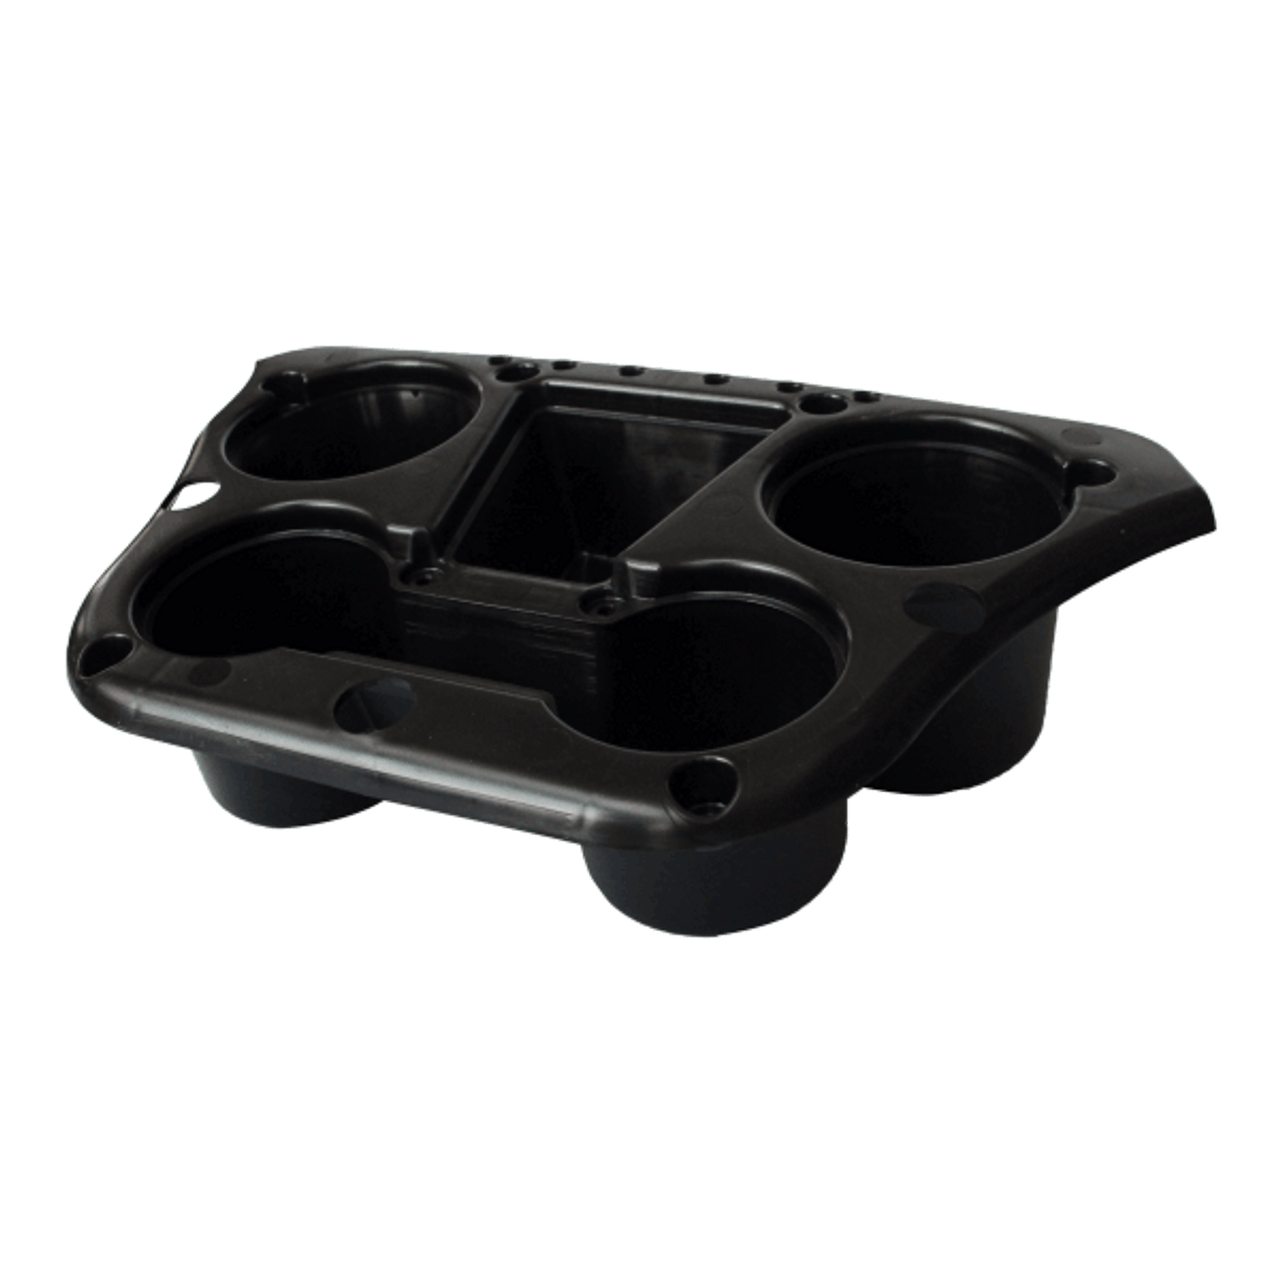 Evolution Golf Cart Cupholder Insert Fits Classic Pro, Classic Plus, Forester, Carrier Models